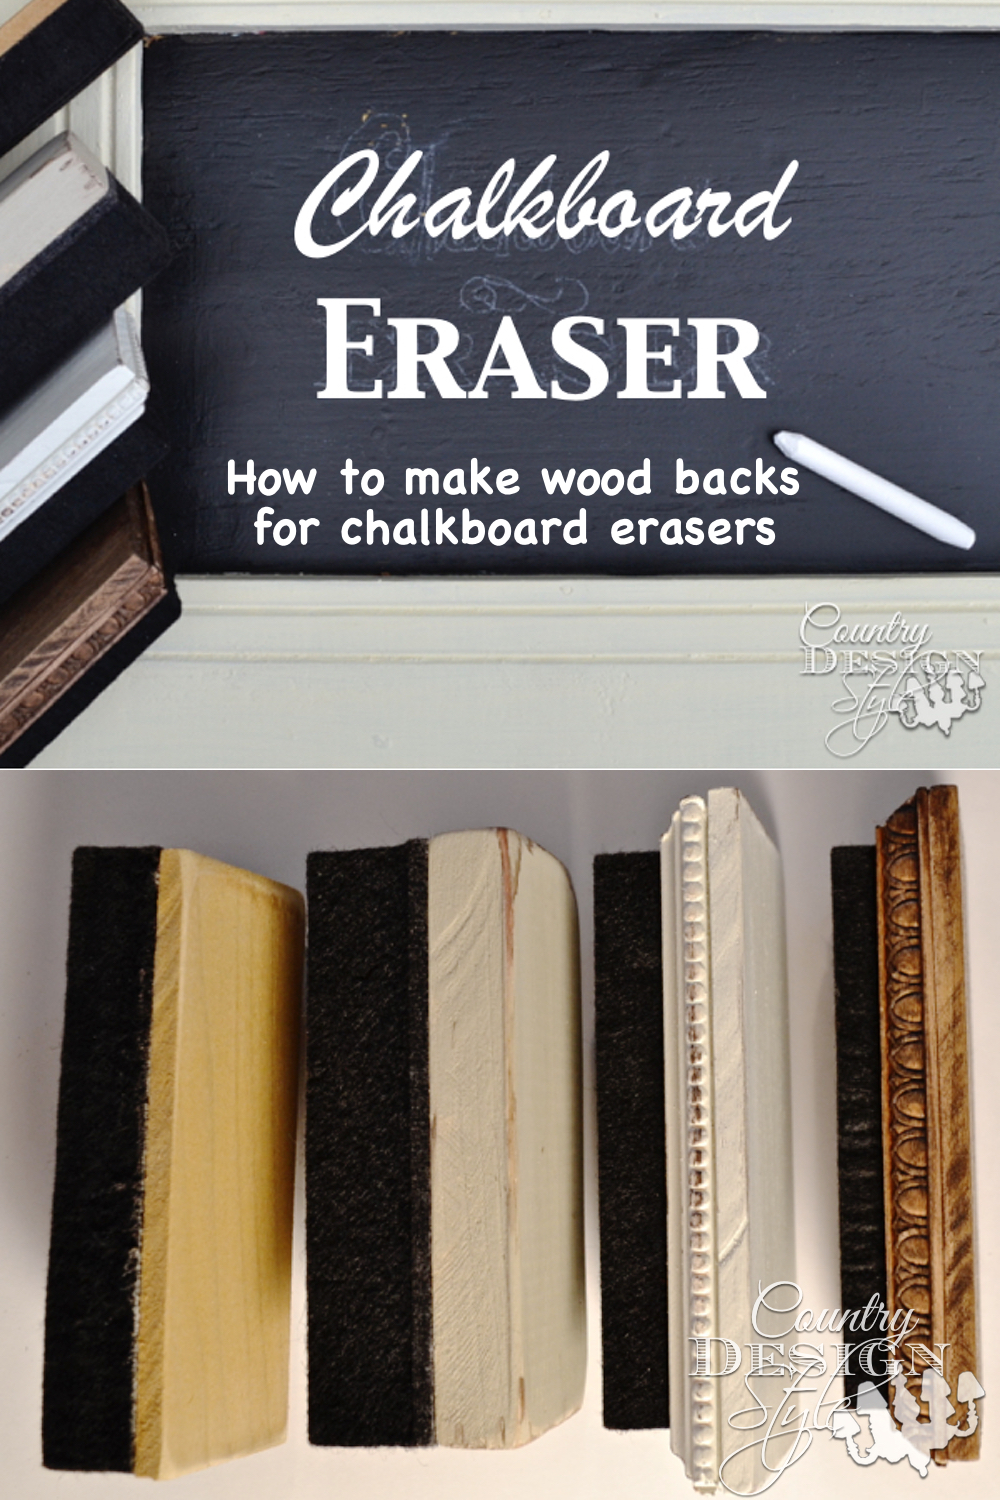 How to DIY your chalkboard eraser with vintage inspired wood back.  Country Design Style